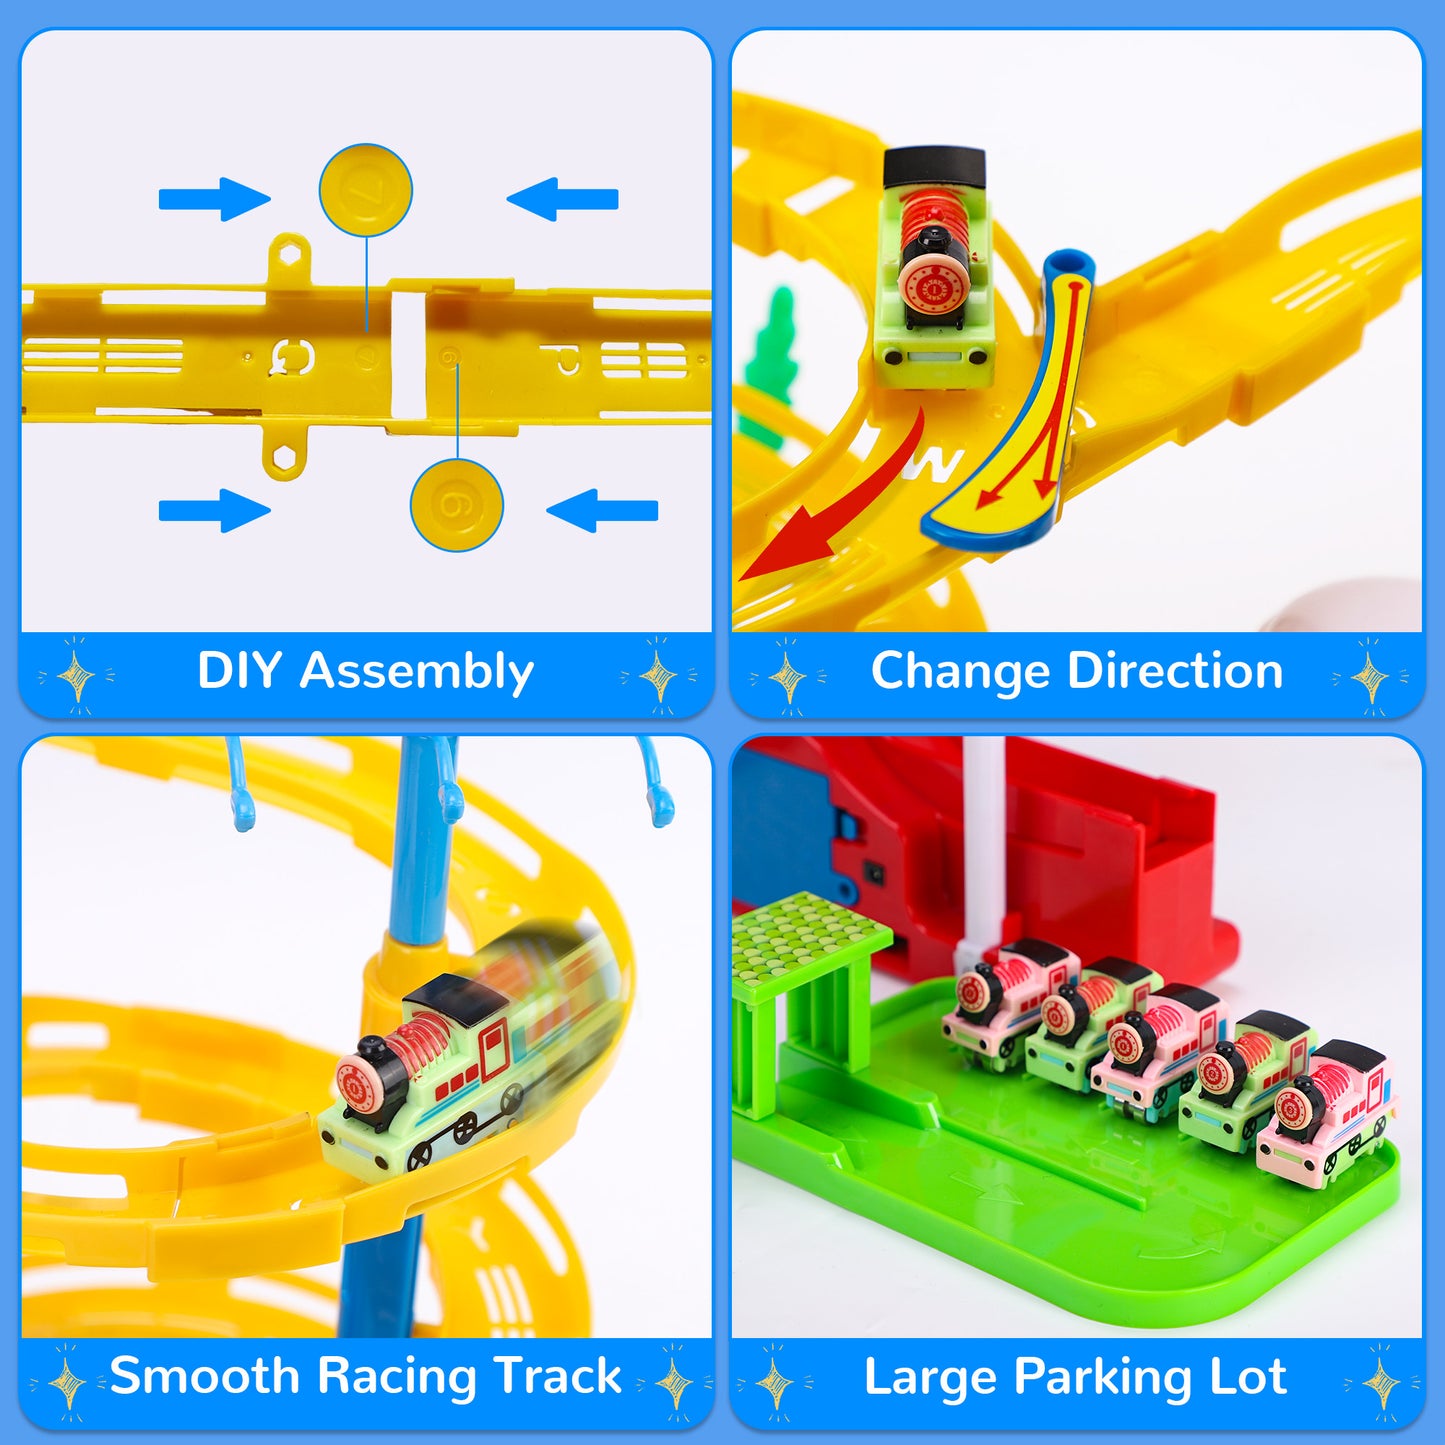 WISAIRT Race Track Set, City Stunt Climbing Track with 5 toy car & oop Raceway Gift for 3-8 Years Old Toddler Boys